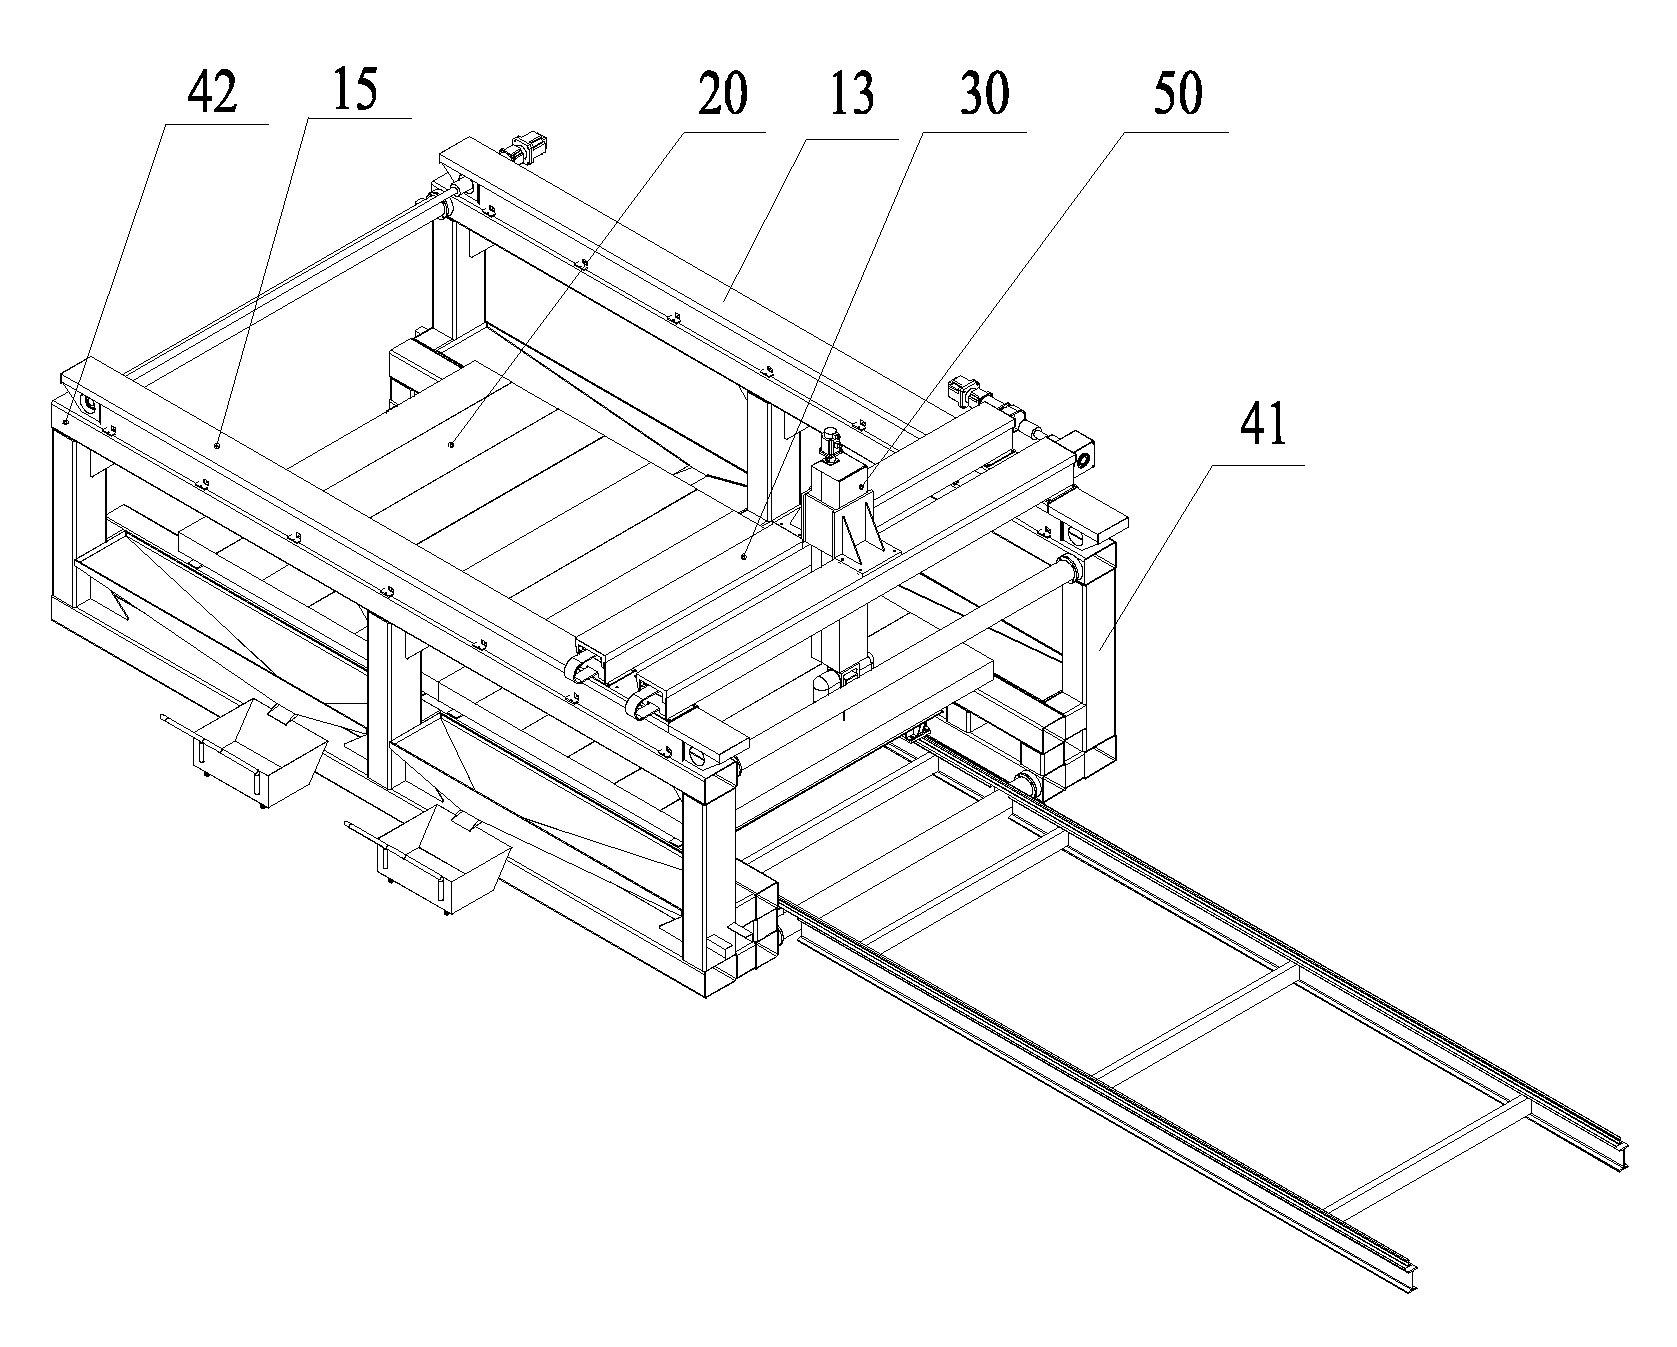 Forming machine without pattern casting